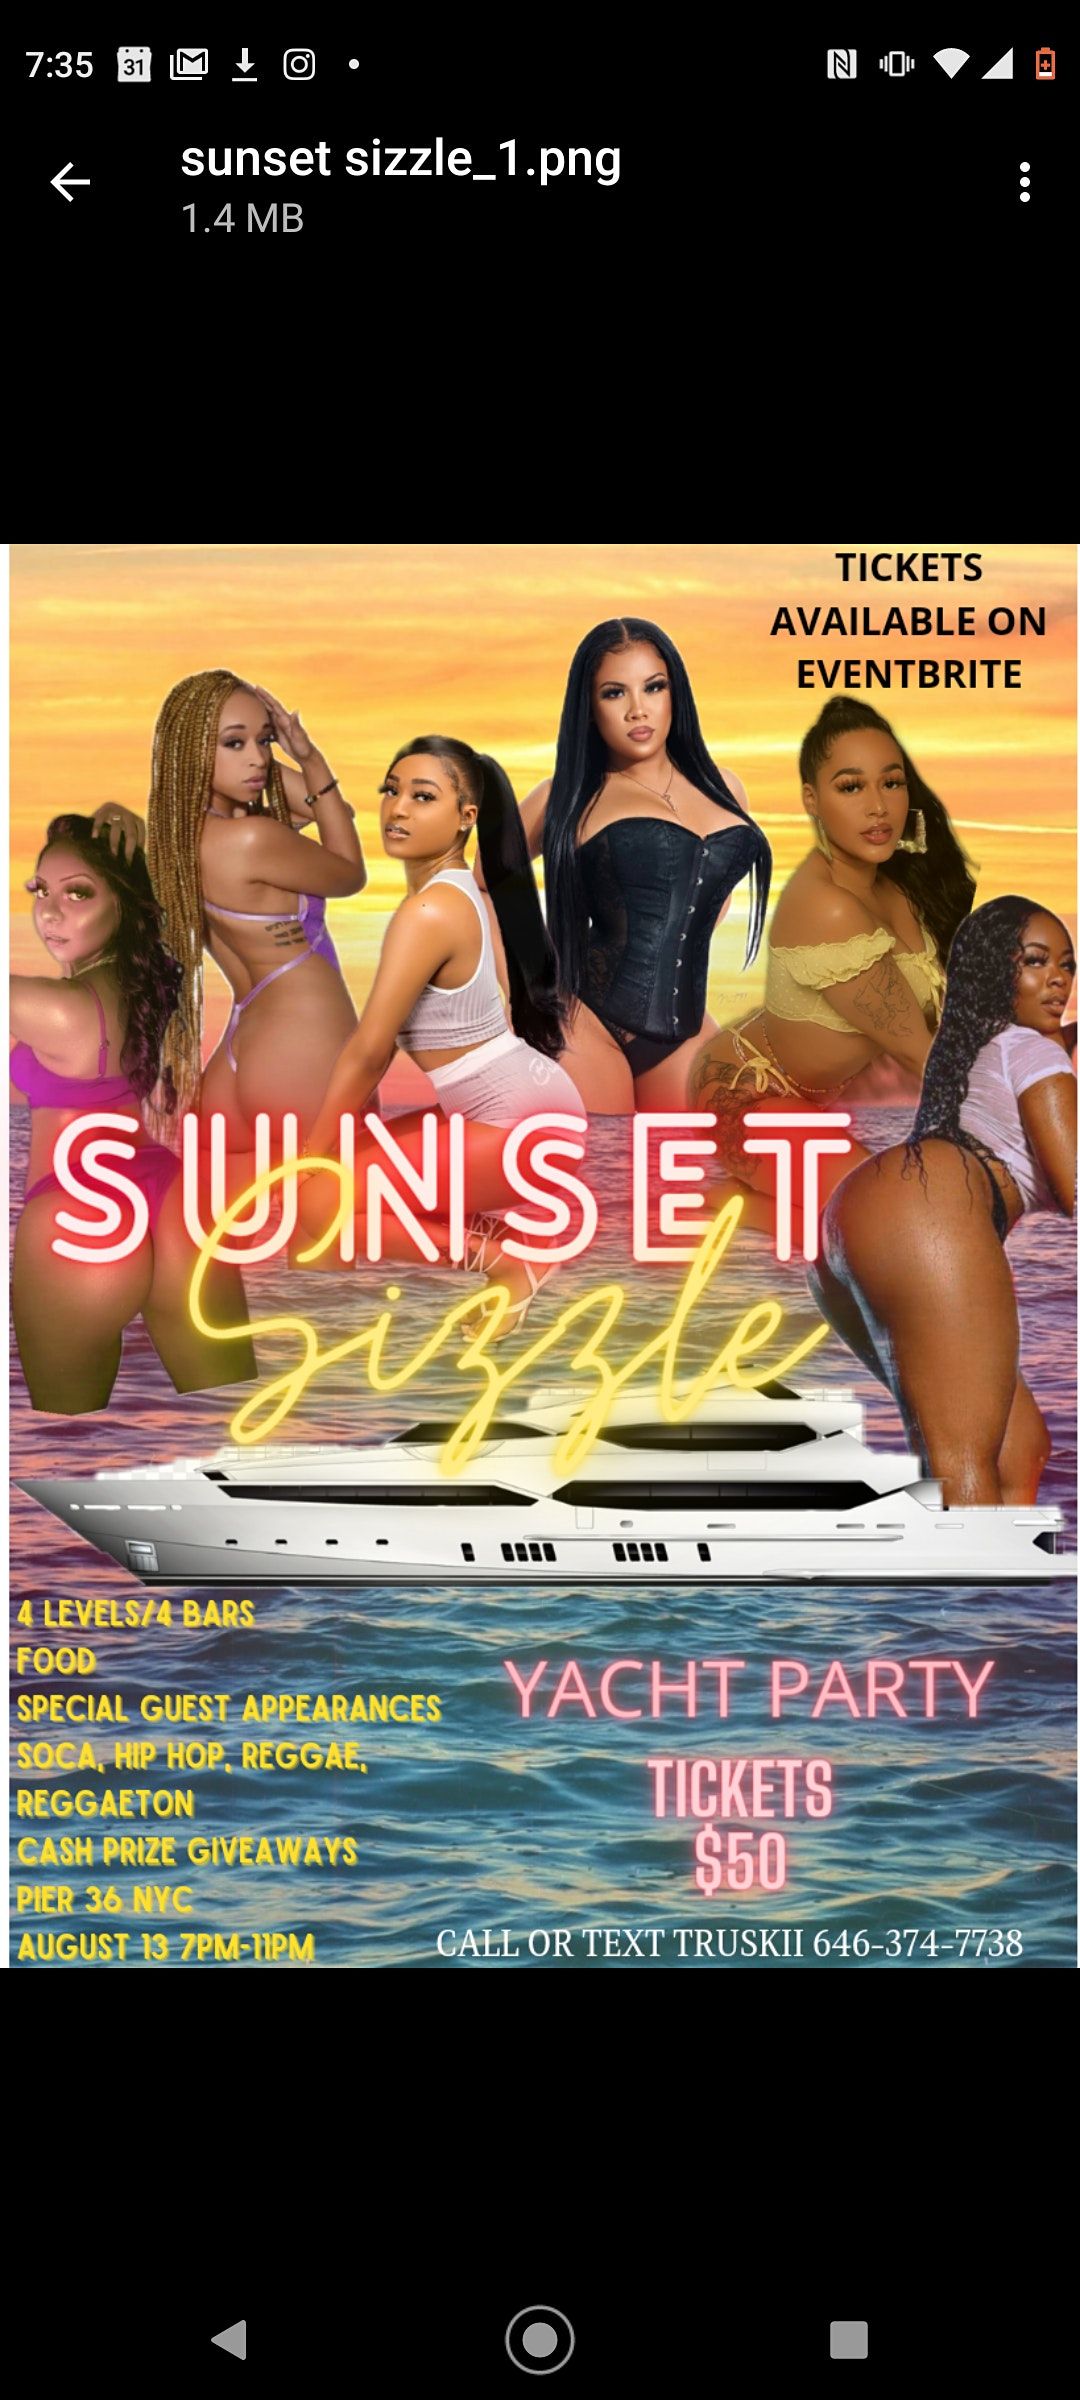 SUNSET SIZZLE YACHT PARTY